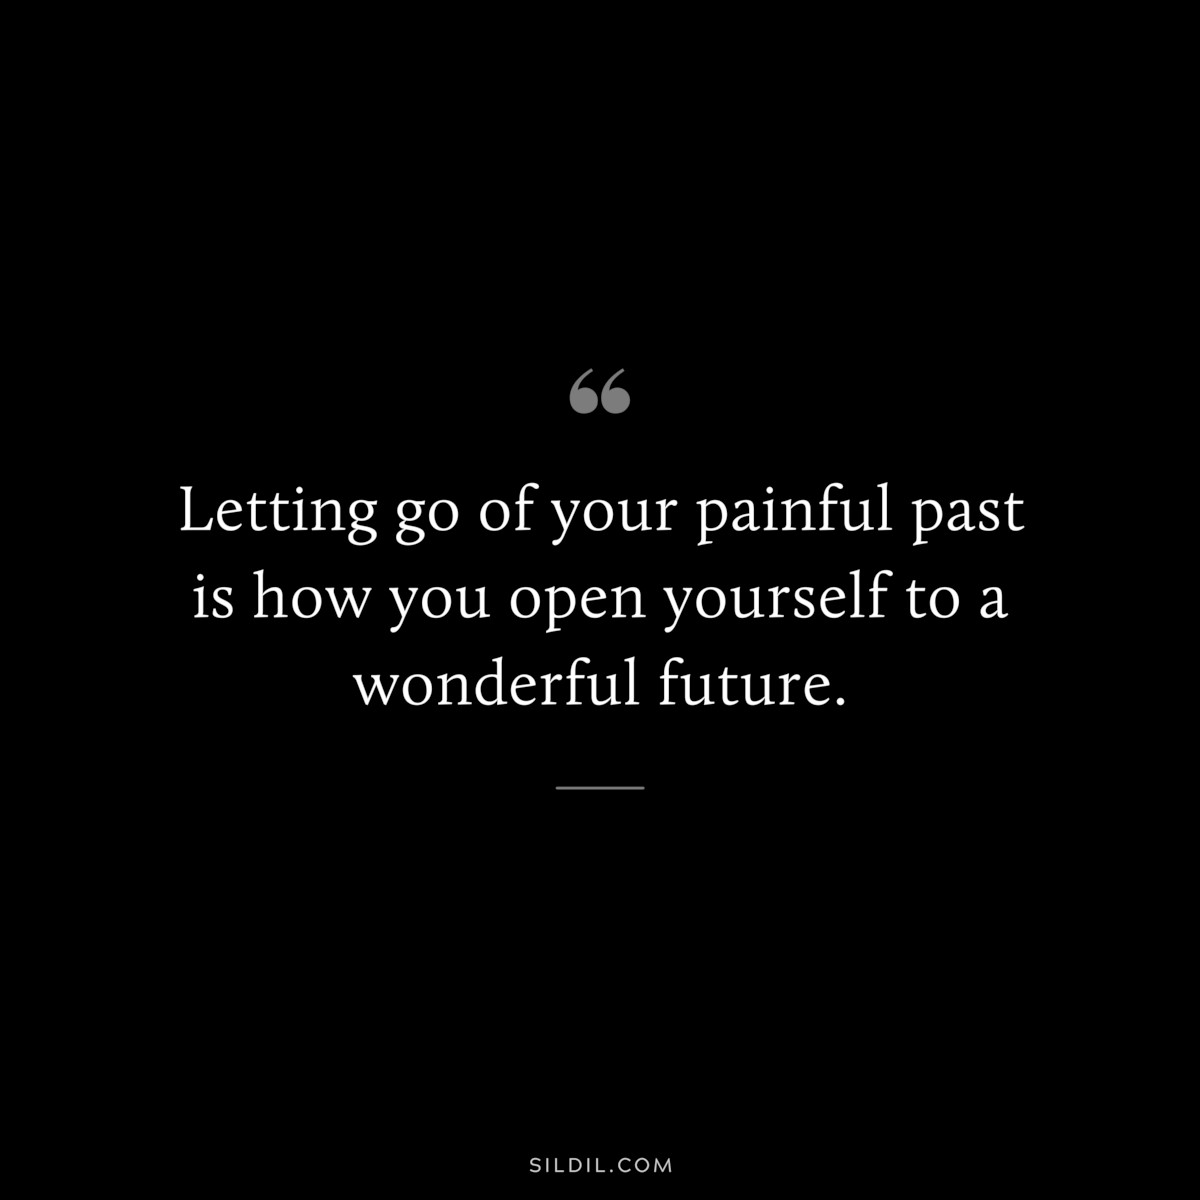 Letting go of your painful past is how you open yourself to a wonderful future.